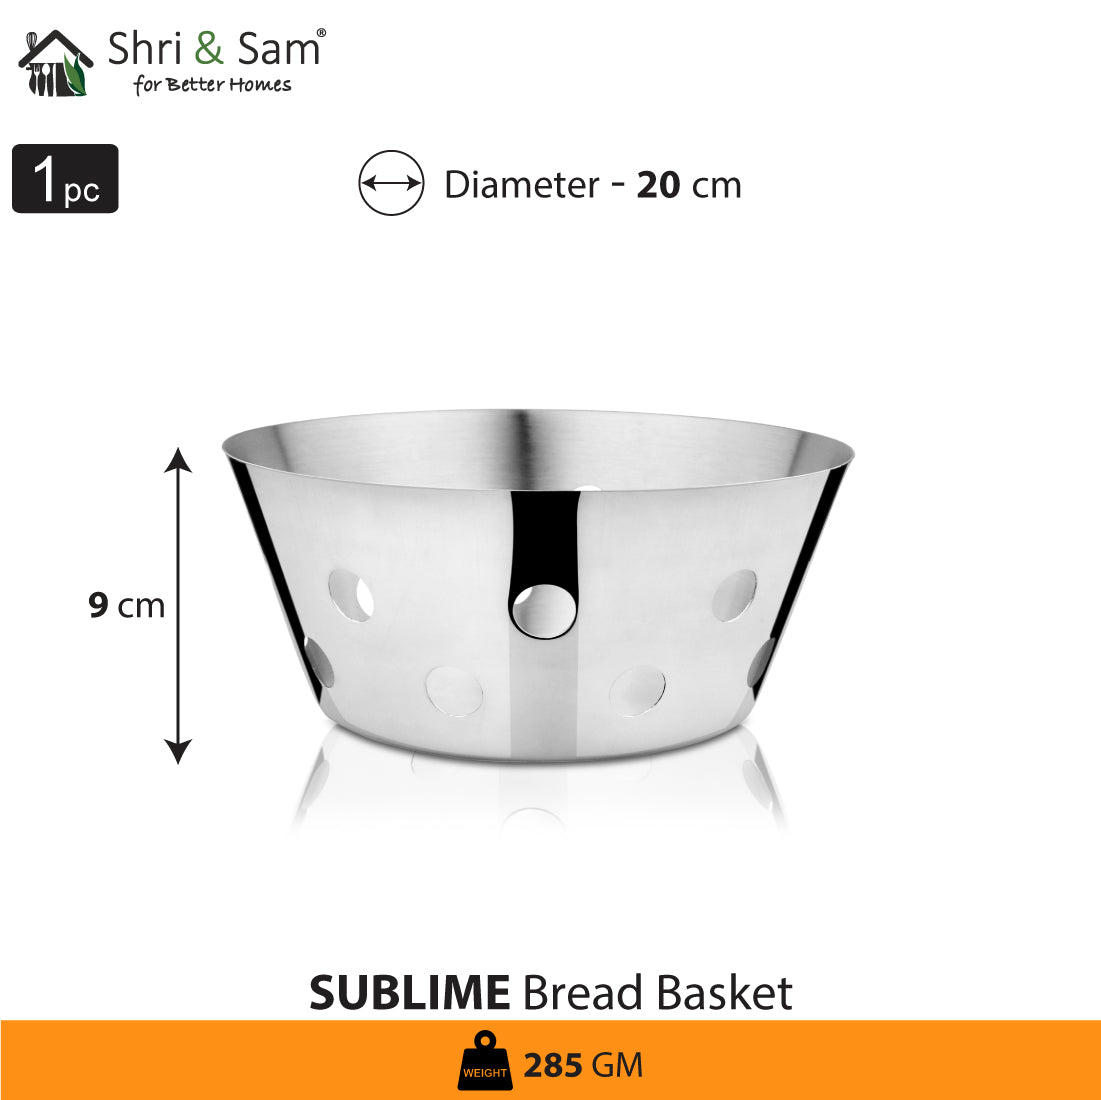 Stainless Steel Bread Basket Sublime